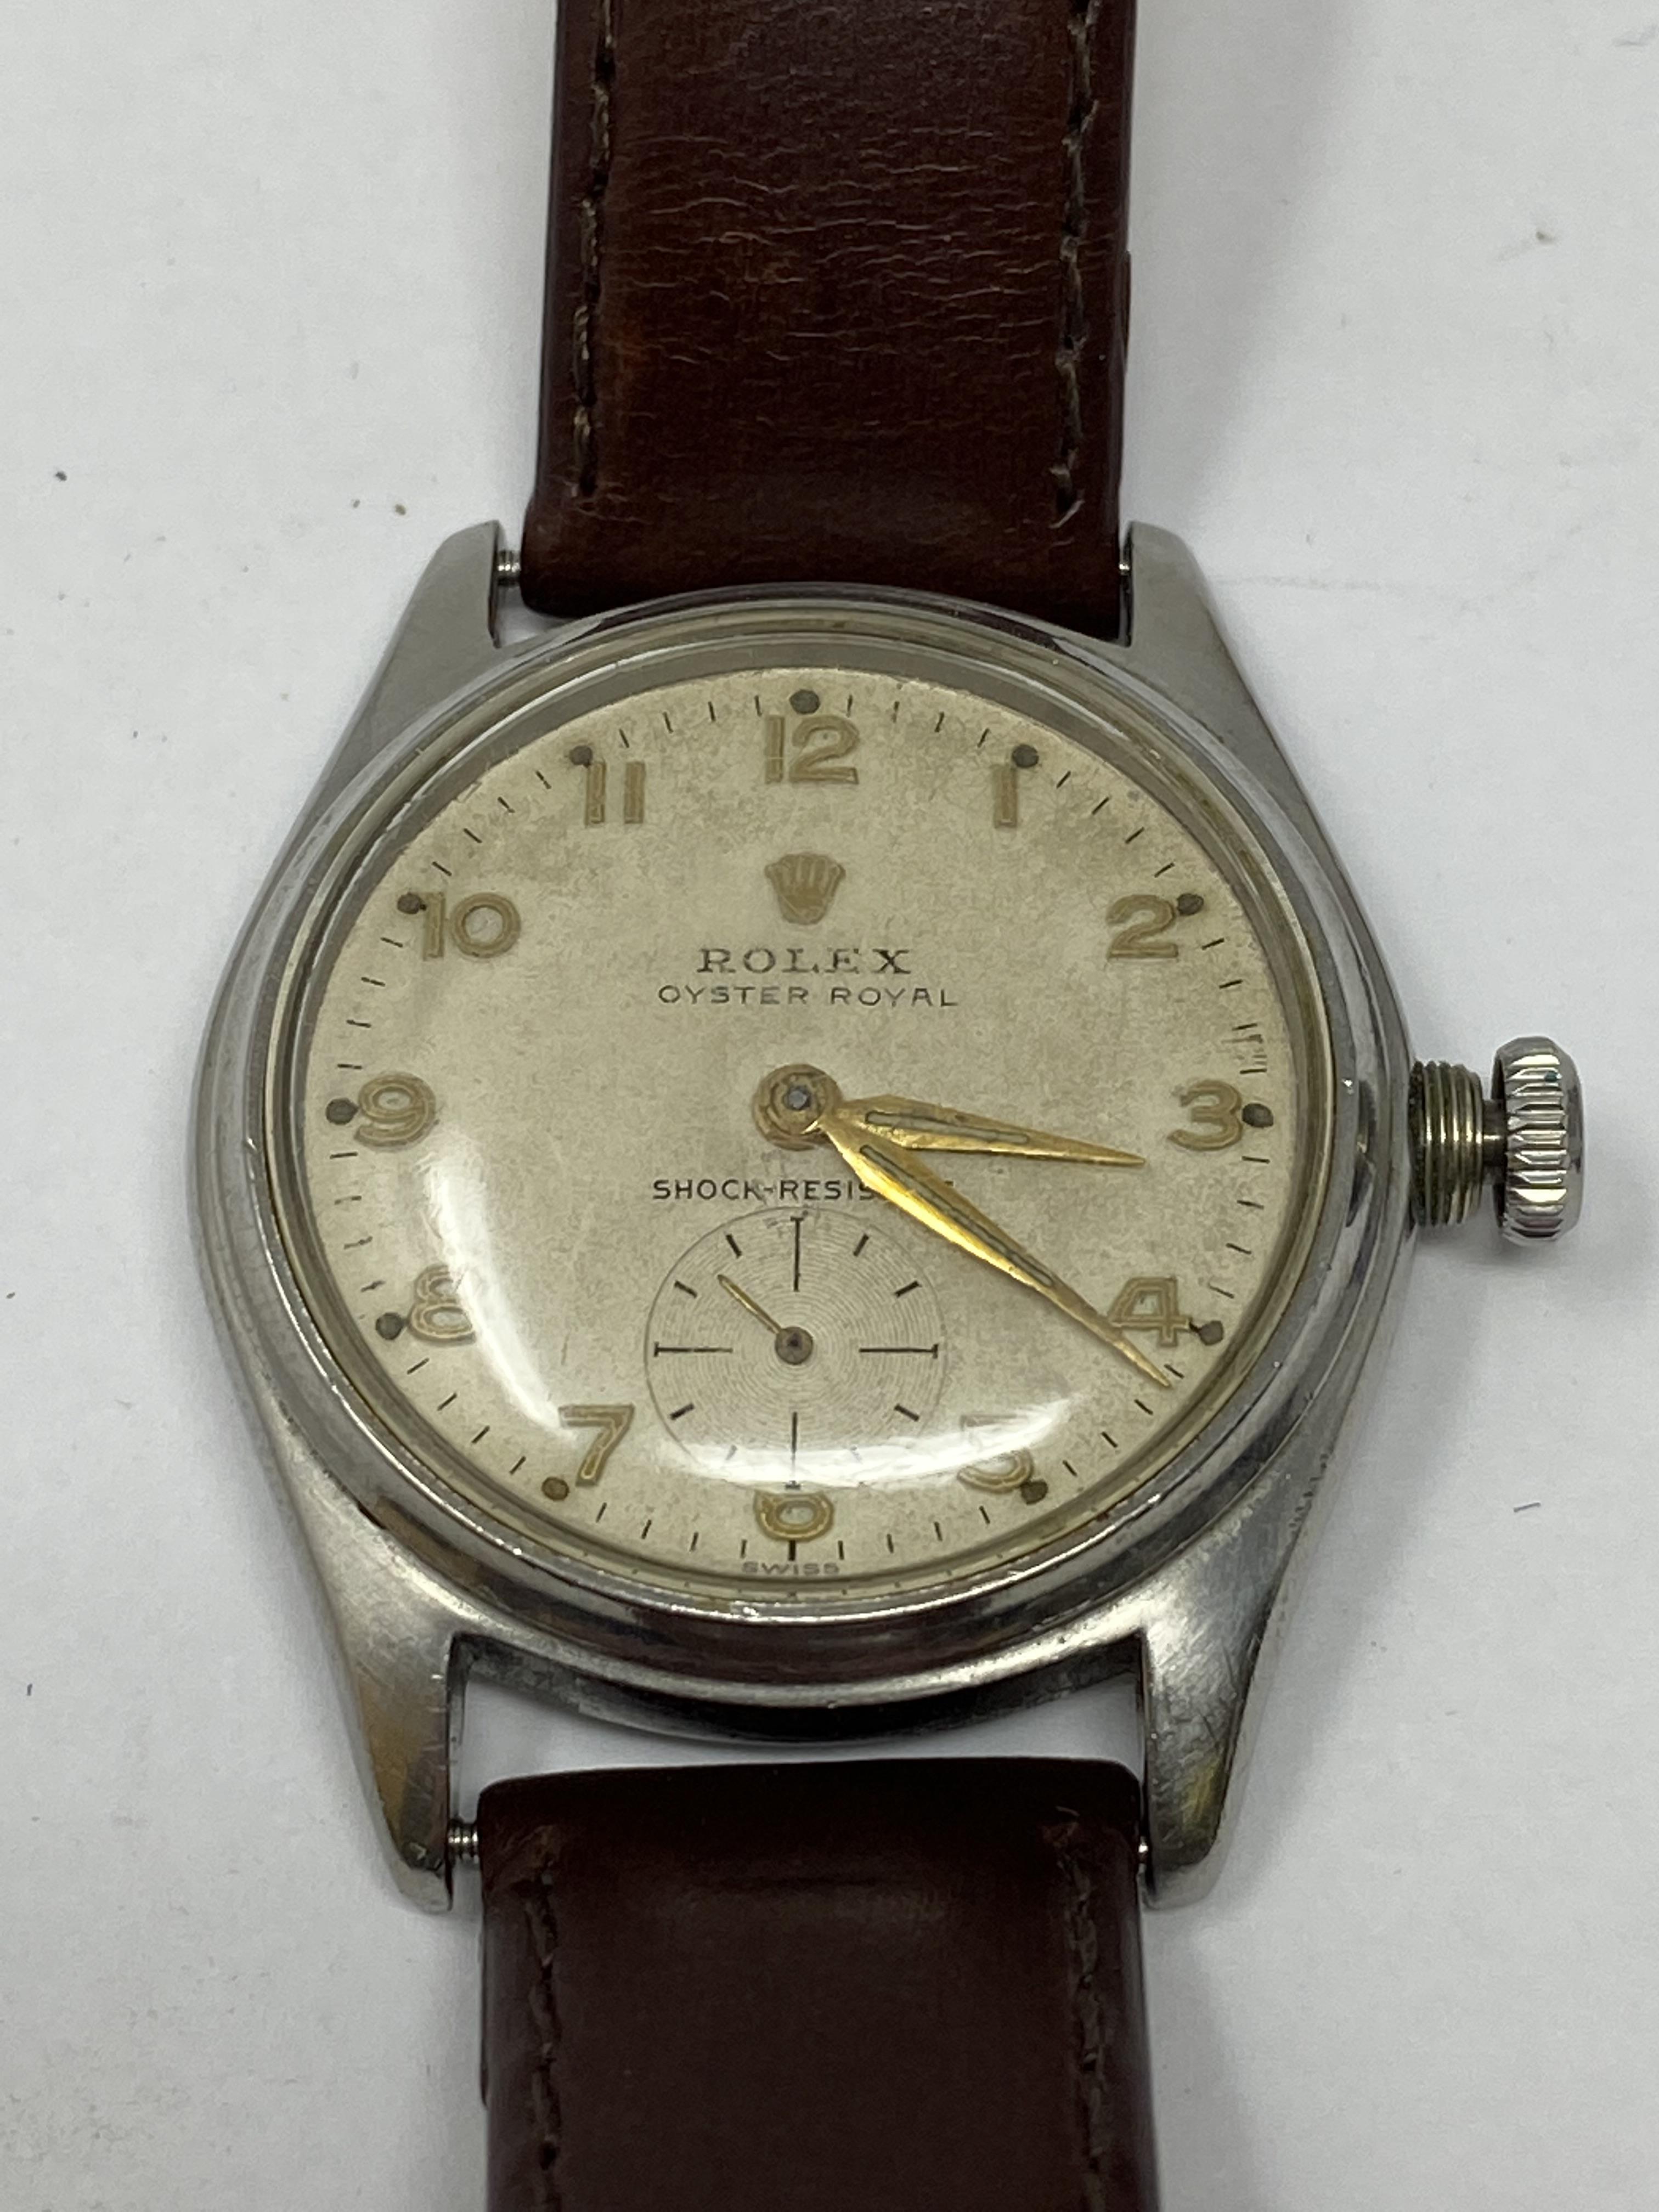 ROLEX OYSTER ROYAL, REF.6044: A MID SIZE STAINLESS STEEL WRISTWATCH, CIRCA 1950 - Image 5 of 5